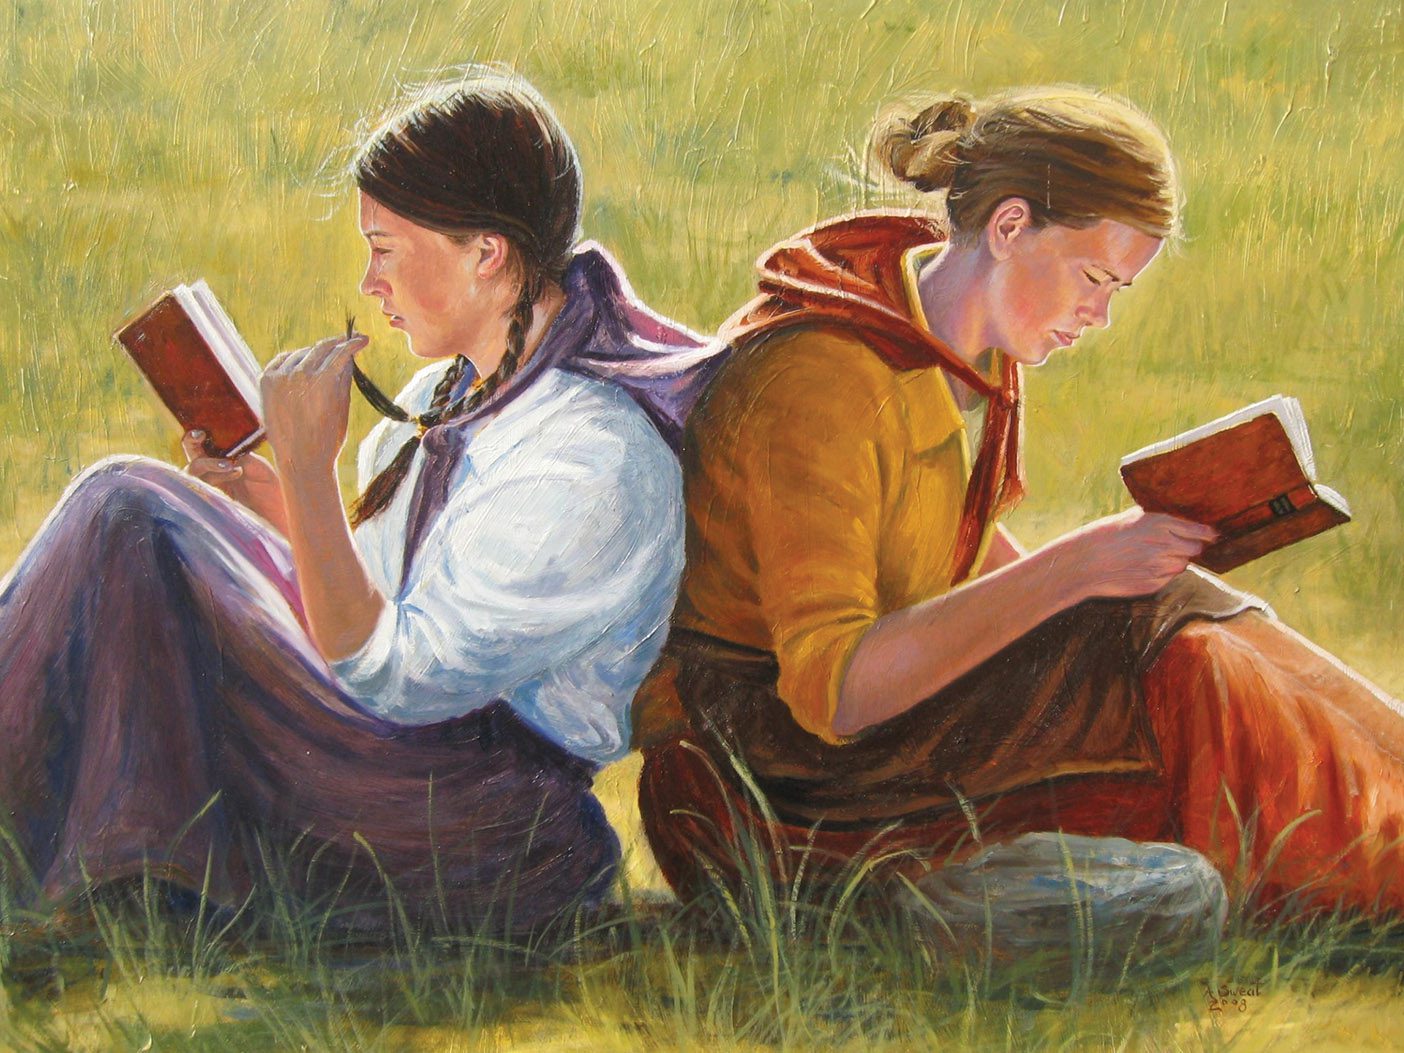 An illustration by Anthony Sweat of two pioneer girls sitting back to back studying scriptures.